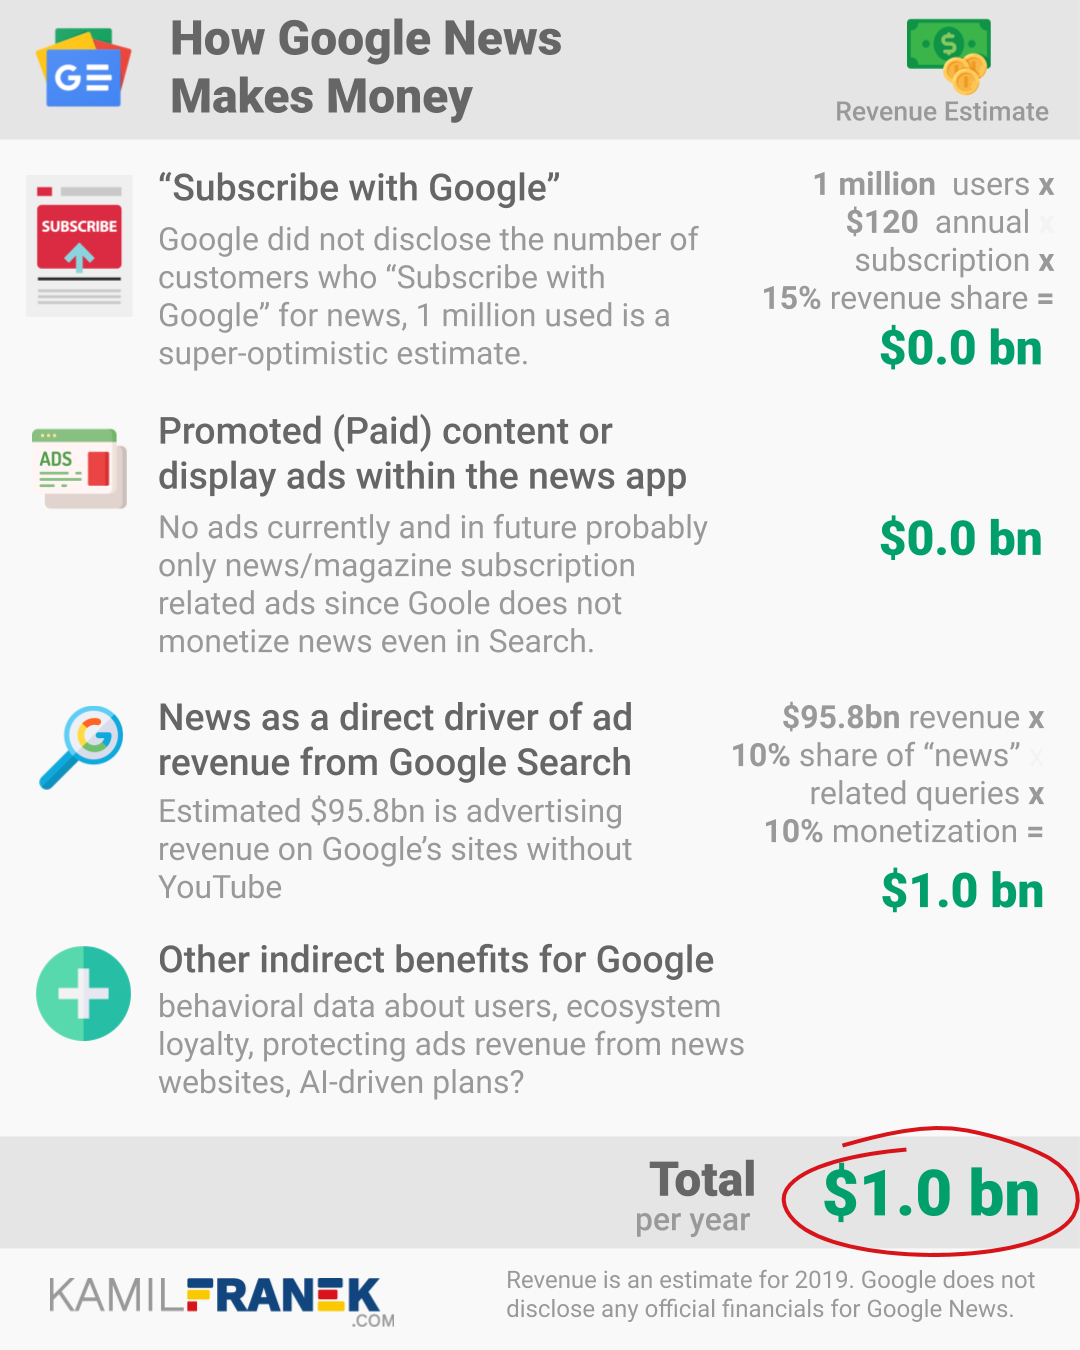 An infographic showing different ways how Google News makes money now or might make in the future